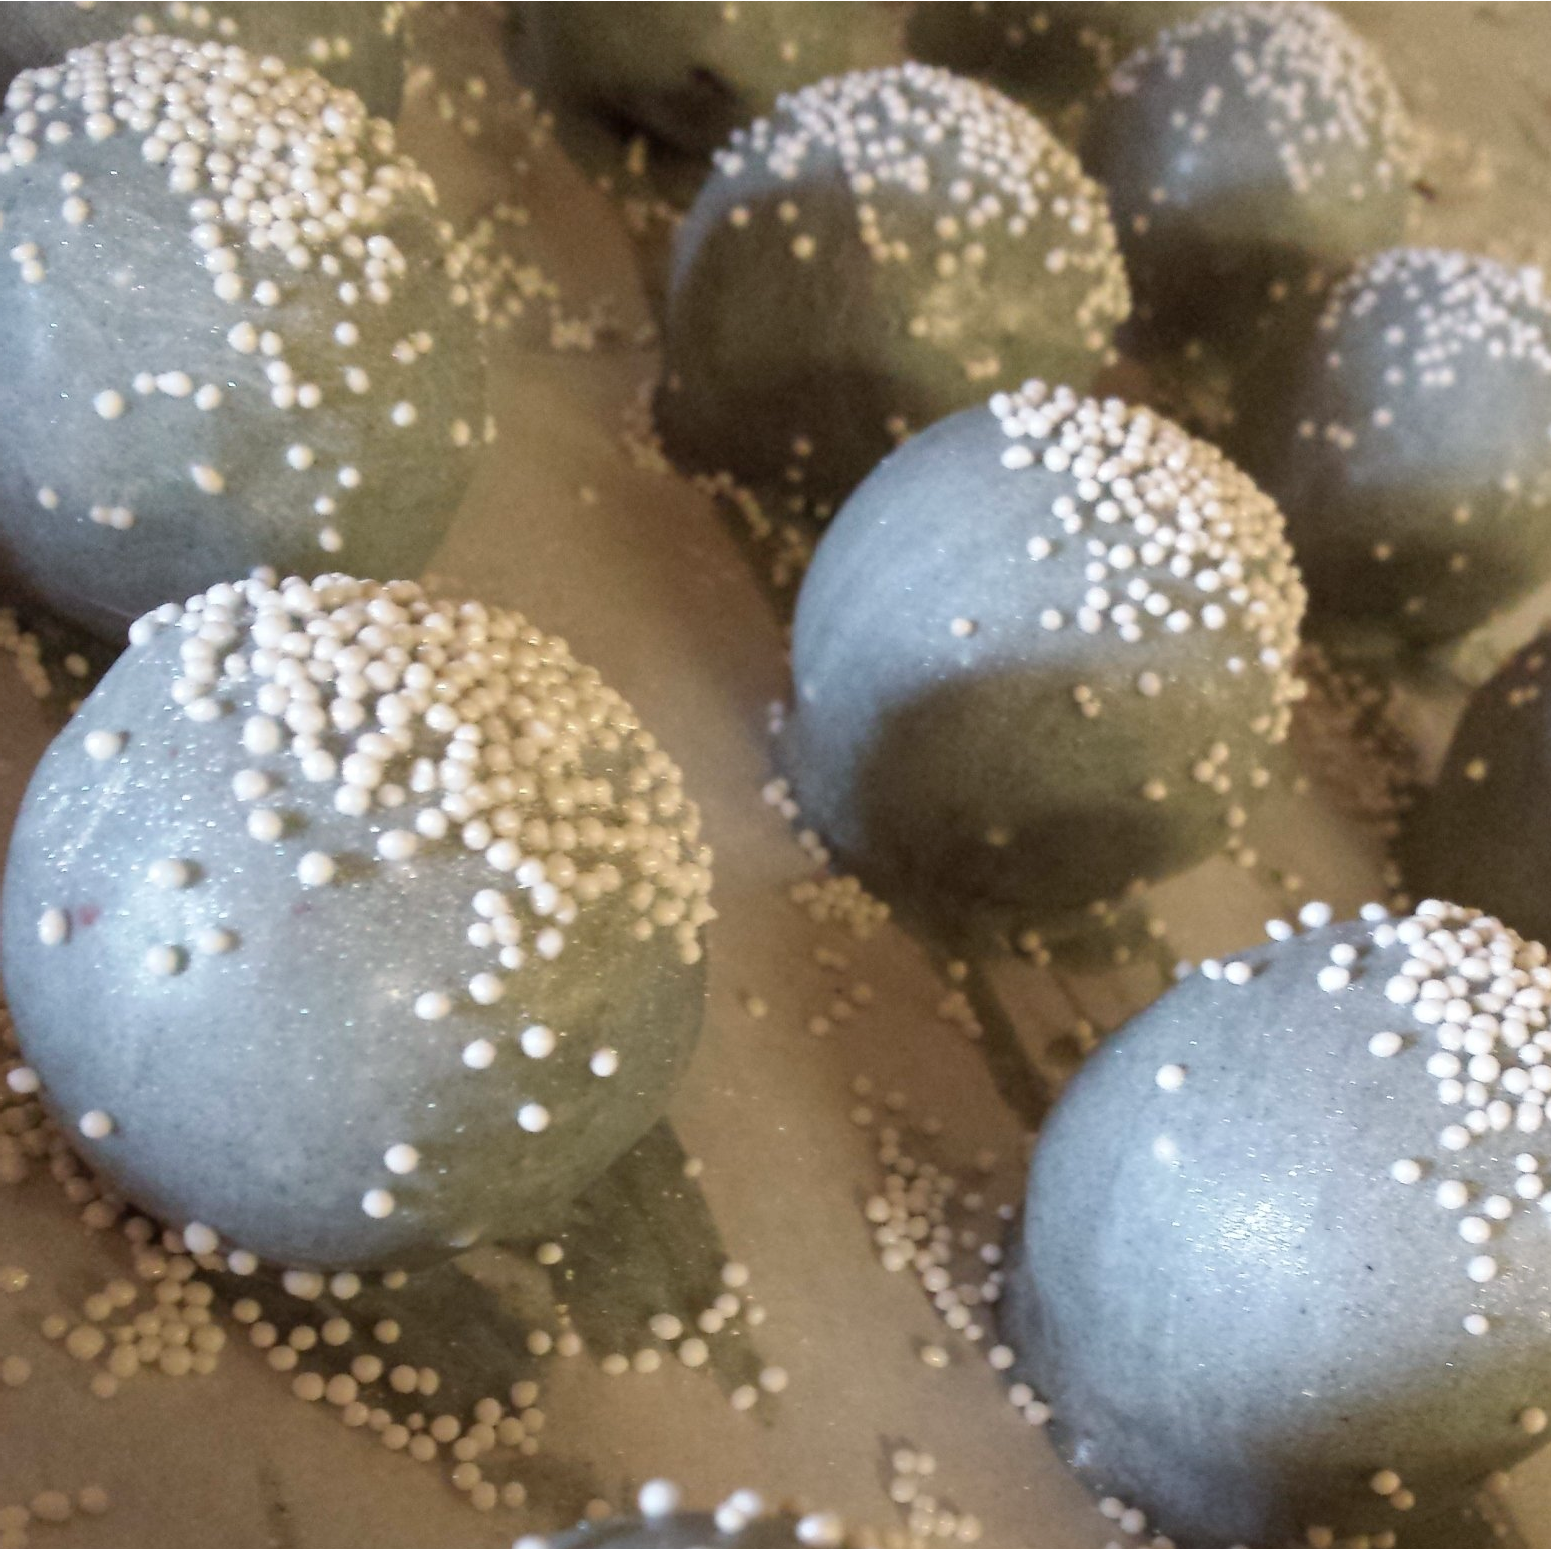 Cake balls coated with silver and white decoration